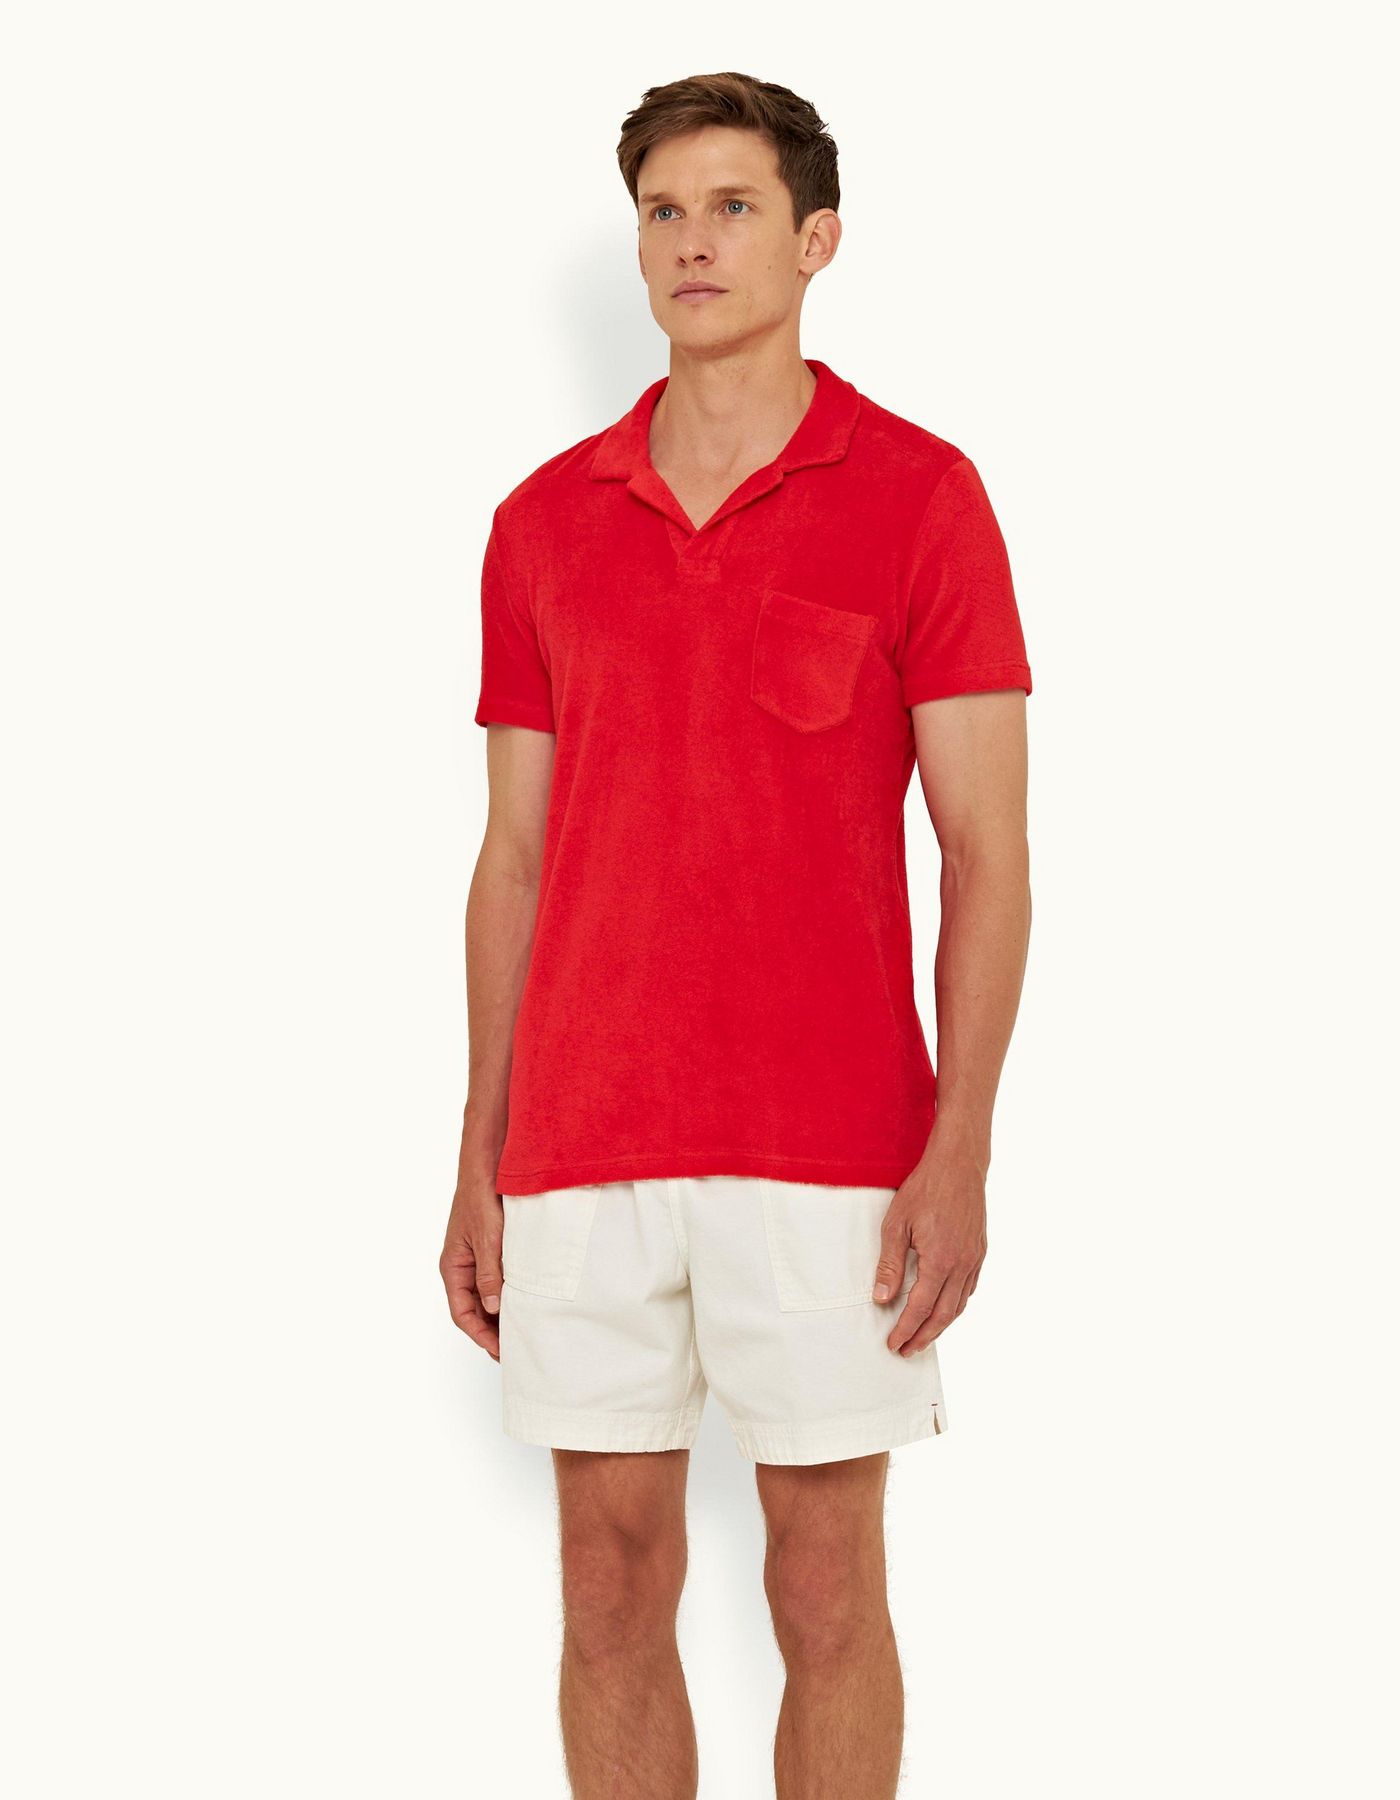 parkere Converge hovedvej Orlebar Brown| Summer Red Tailored Fit Towelling Resort Polo Shirt